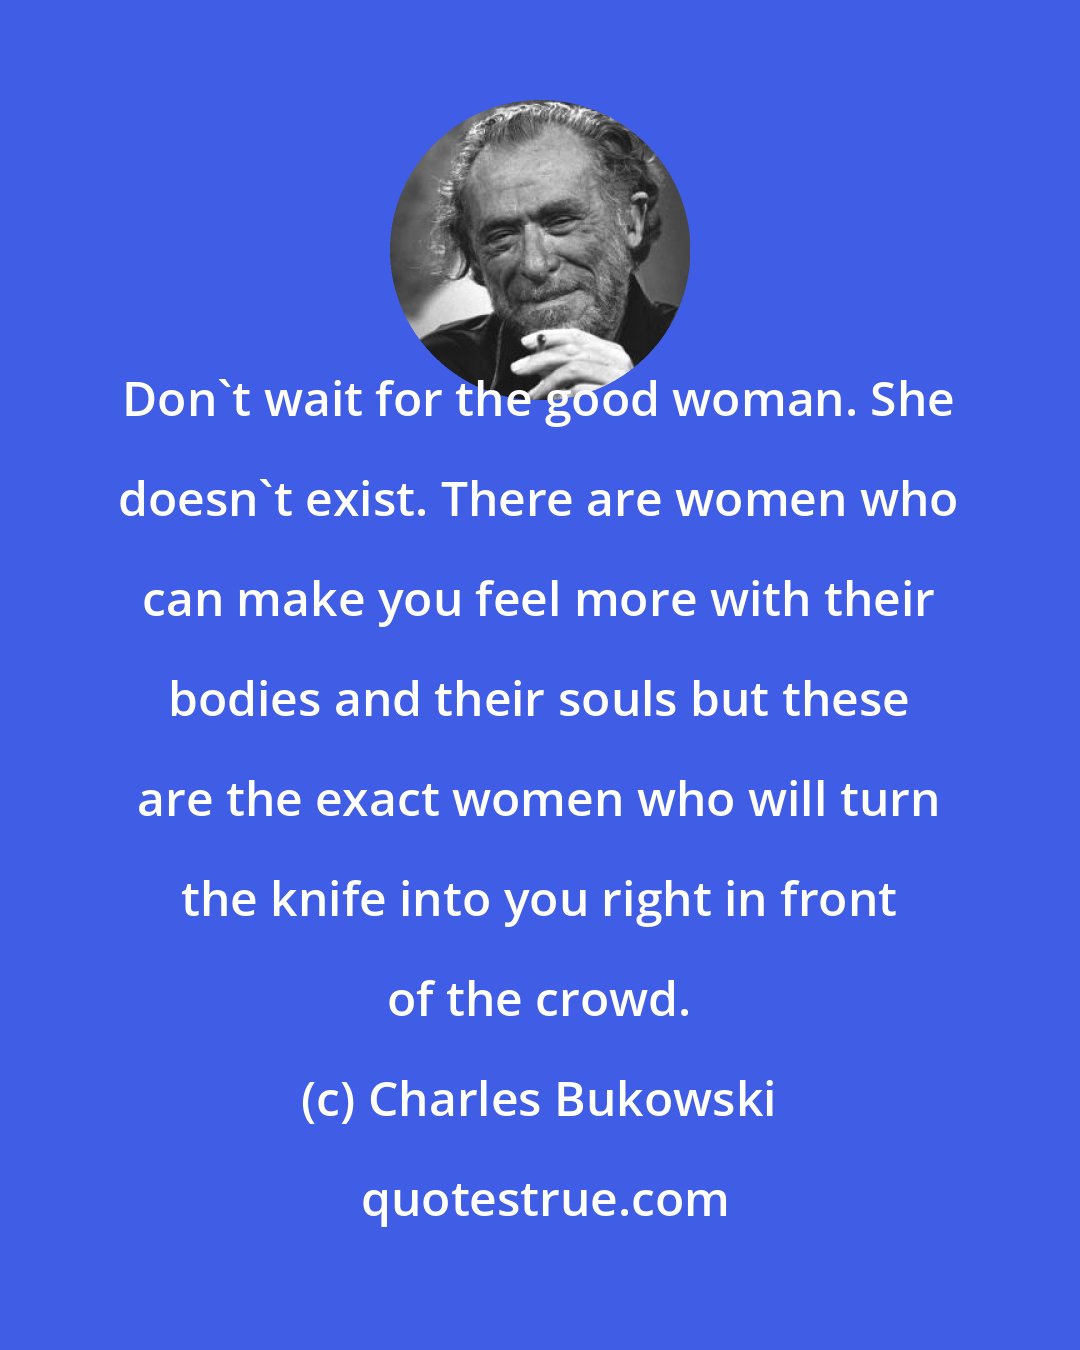 Charles Bukowski: Don't wait for the good woman. She doesn't exist. There are women who can make you feel more with their bodies and their souls but these are the exact women who will turn the knife into you right in front of the crowd.